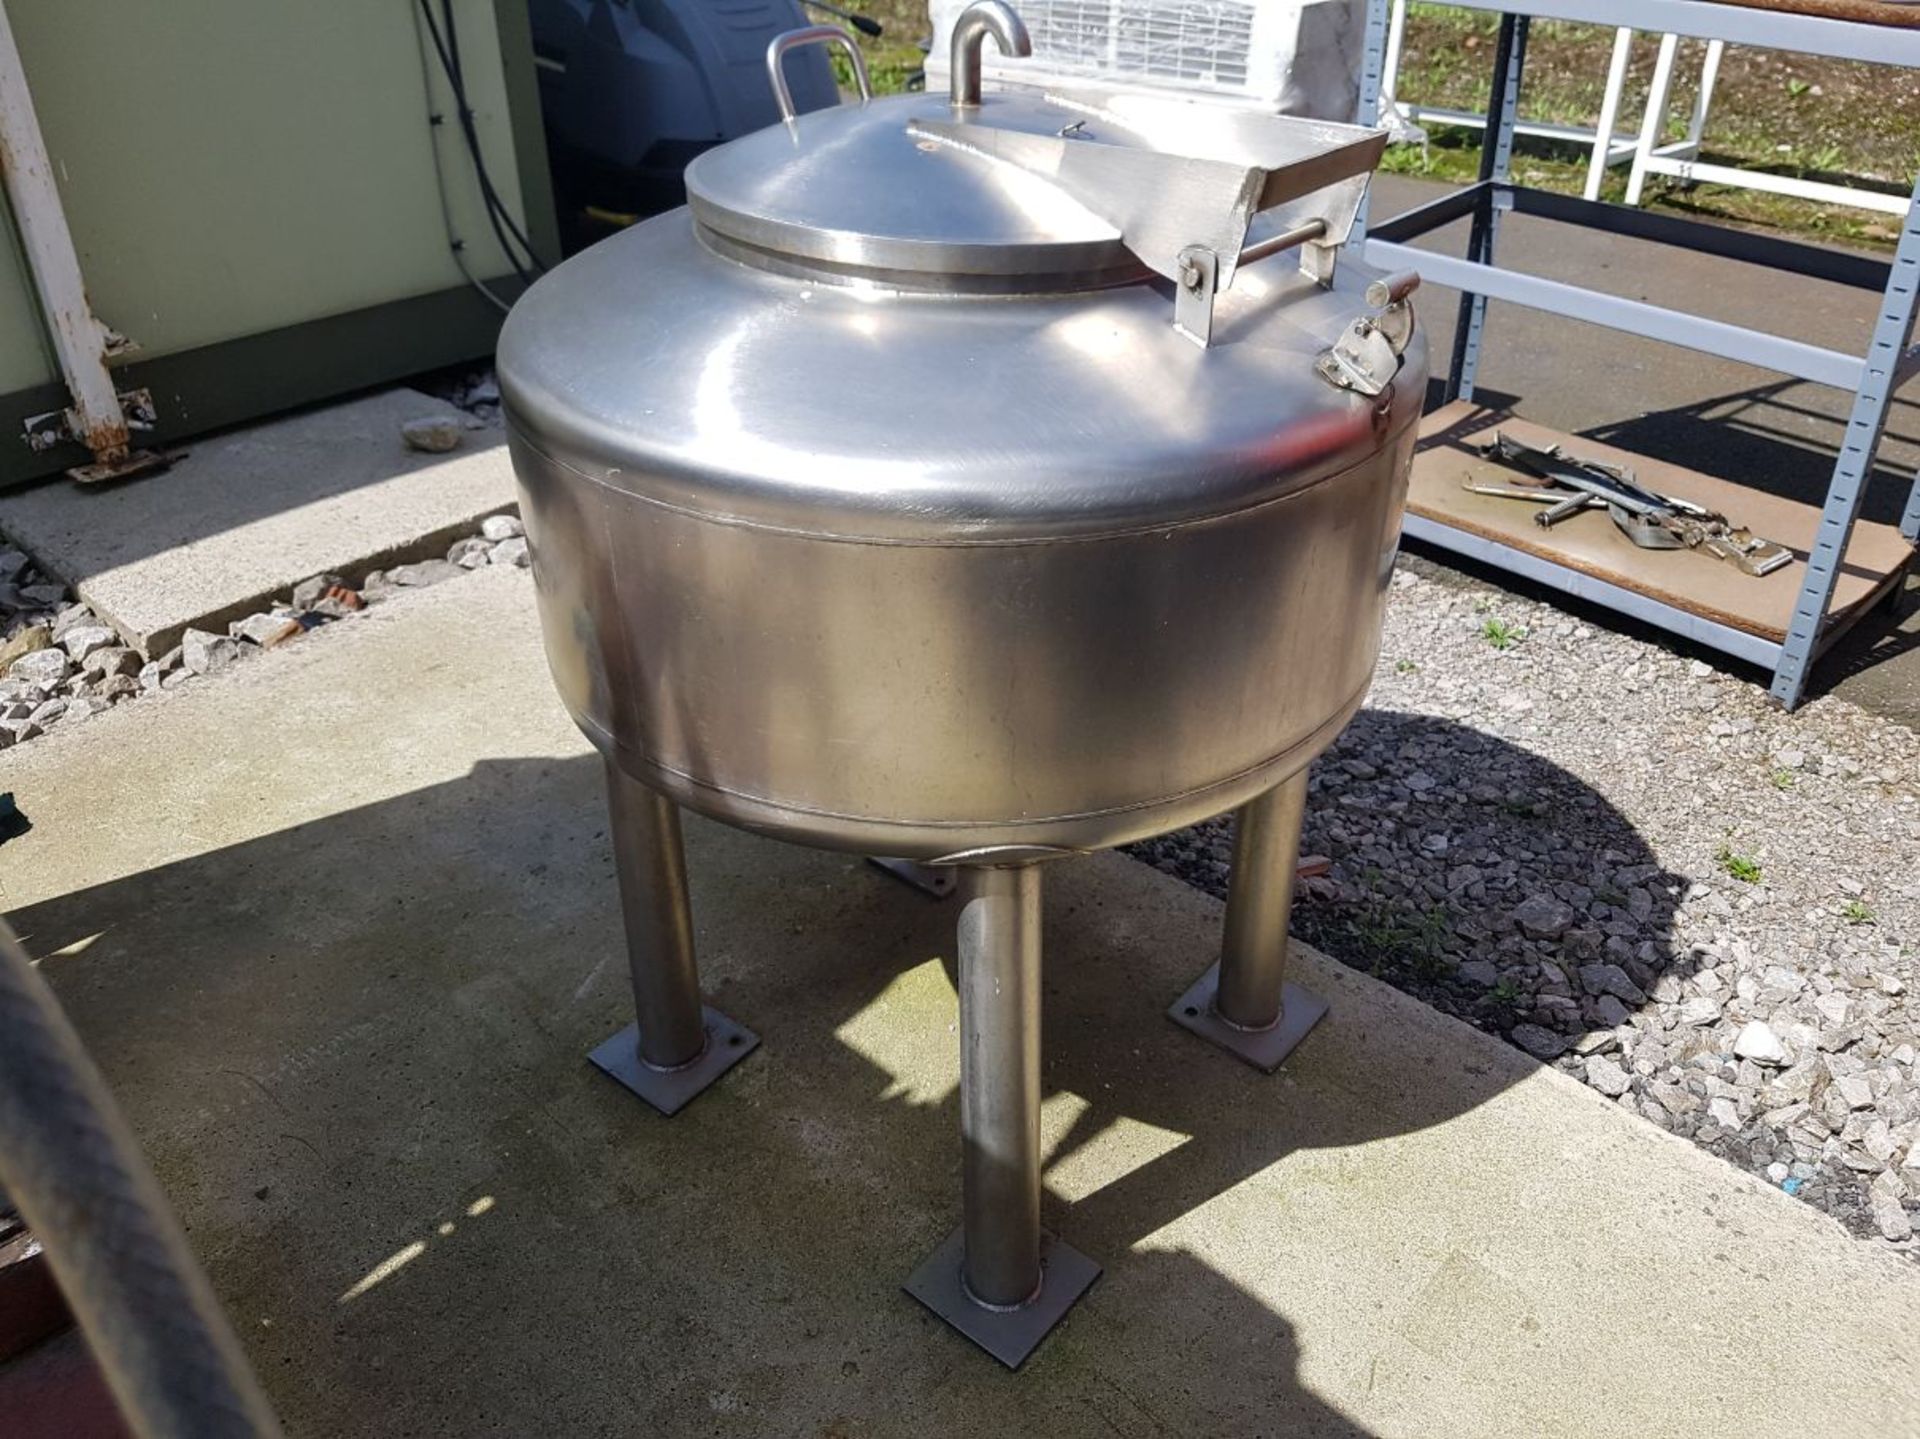 Stainless steel filtration vessel - Image 6 of 6